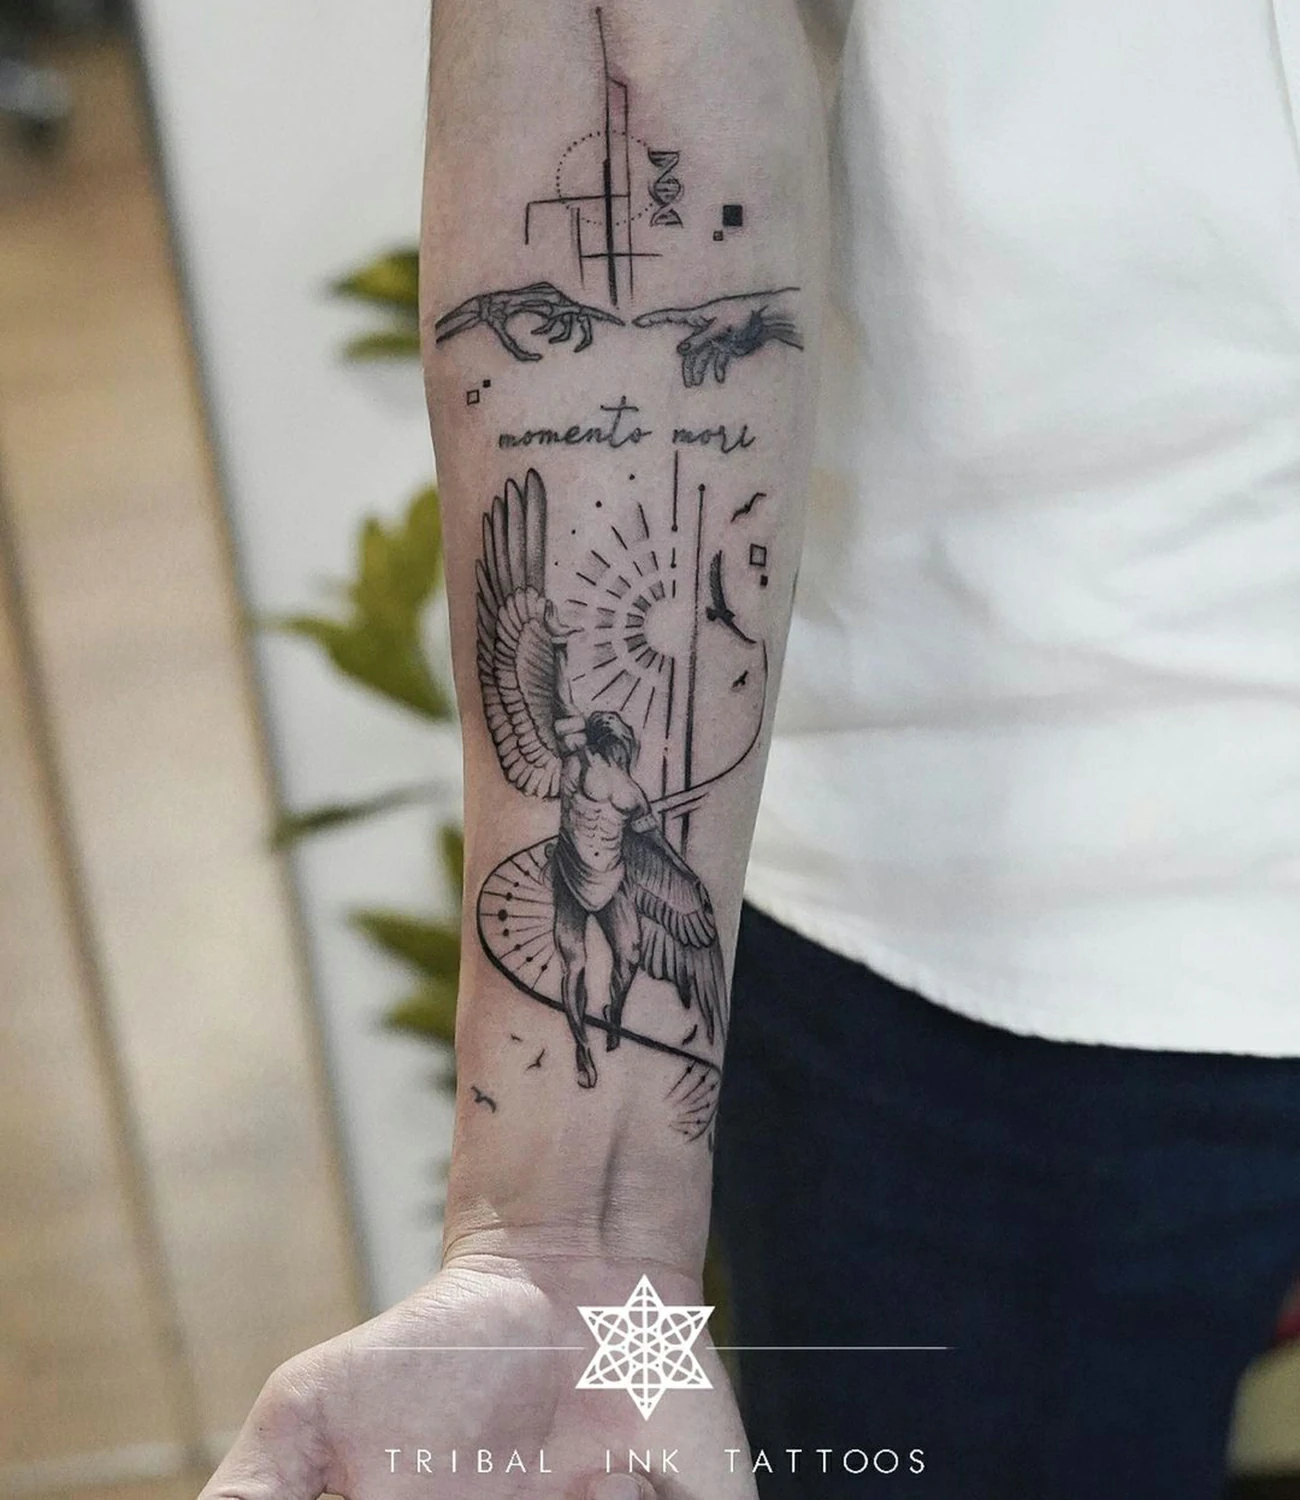 Geometric Tattoos for Guys: Geometric tattoos for guys typically include bold and structured designs, emphasizing strength and precision.